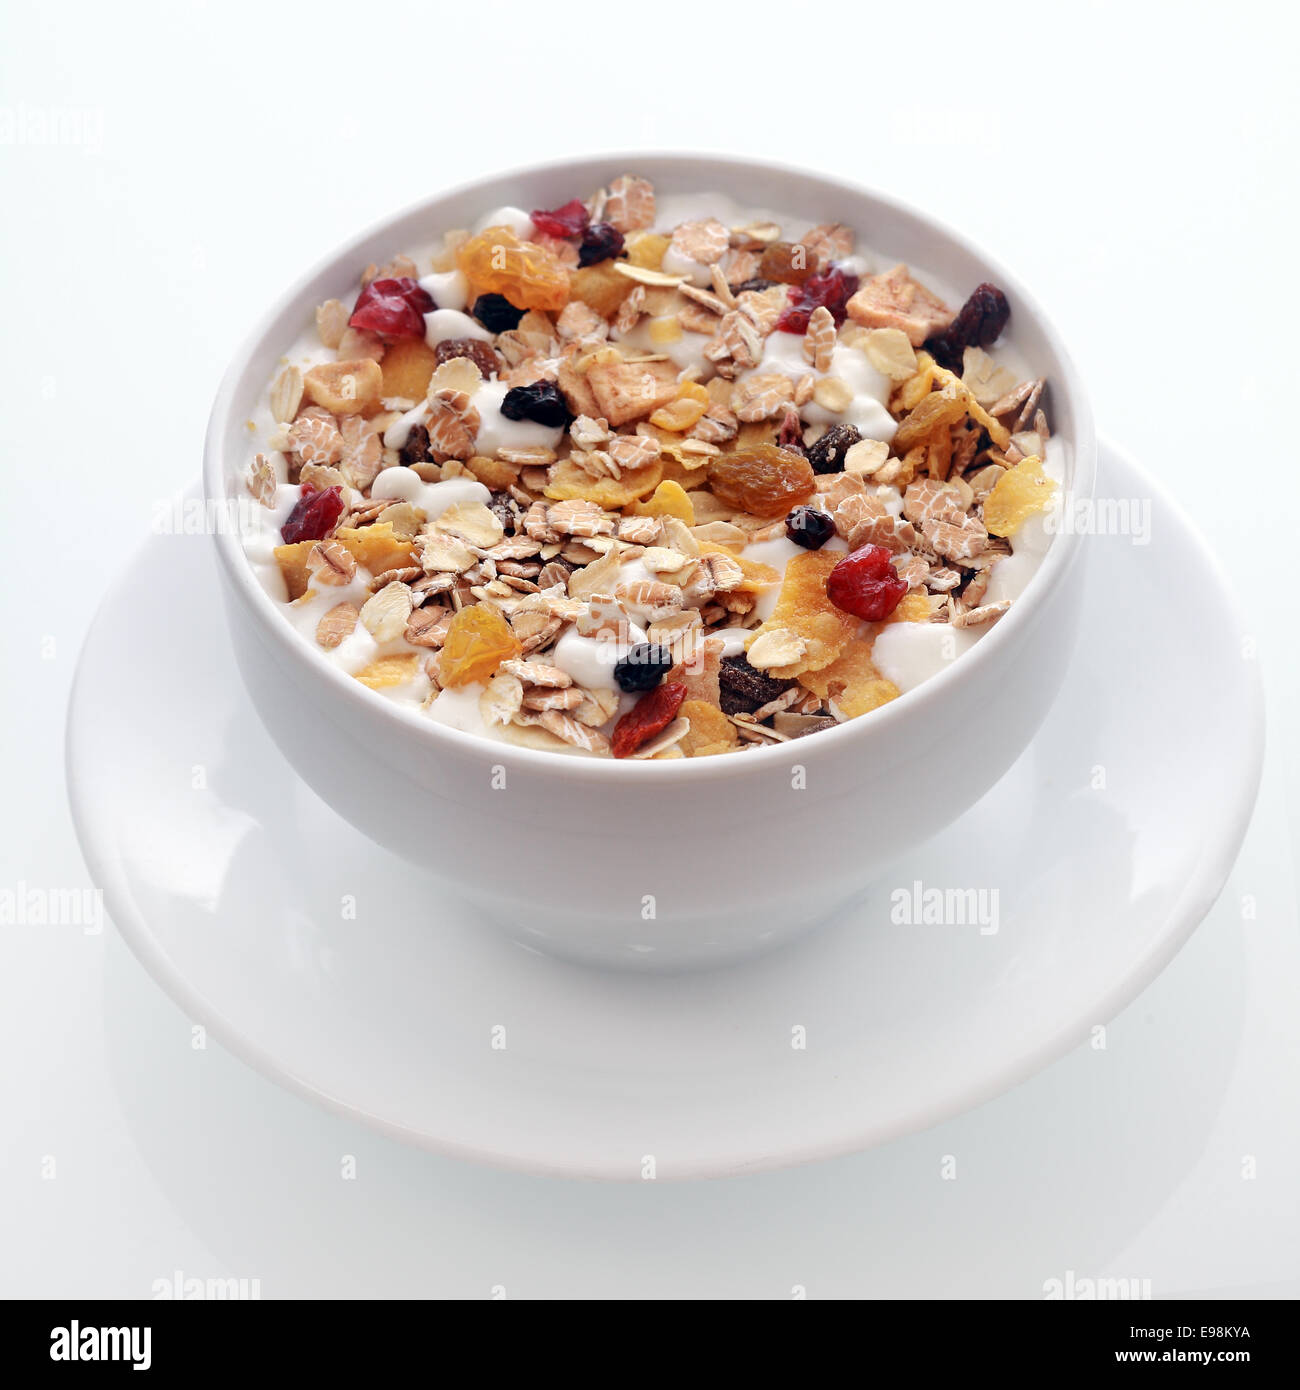 Bowl of delicious breakfast muesli with oat and wheat flakes mixed with dried fruit and nuts served in a white ceramic bowl for Stock Photo